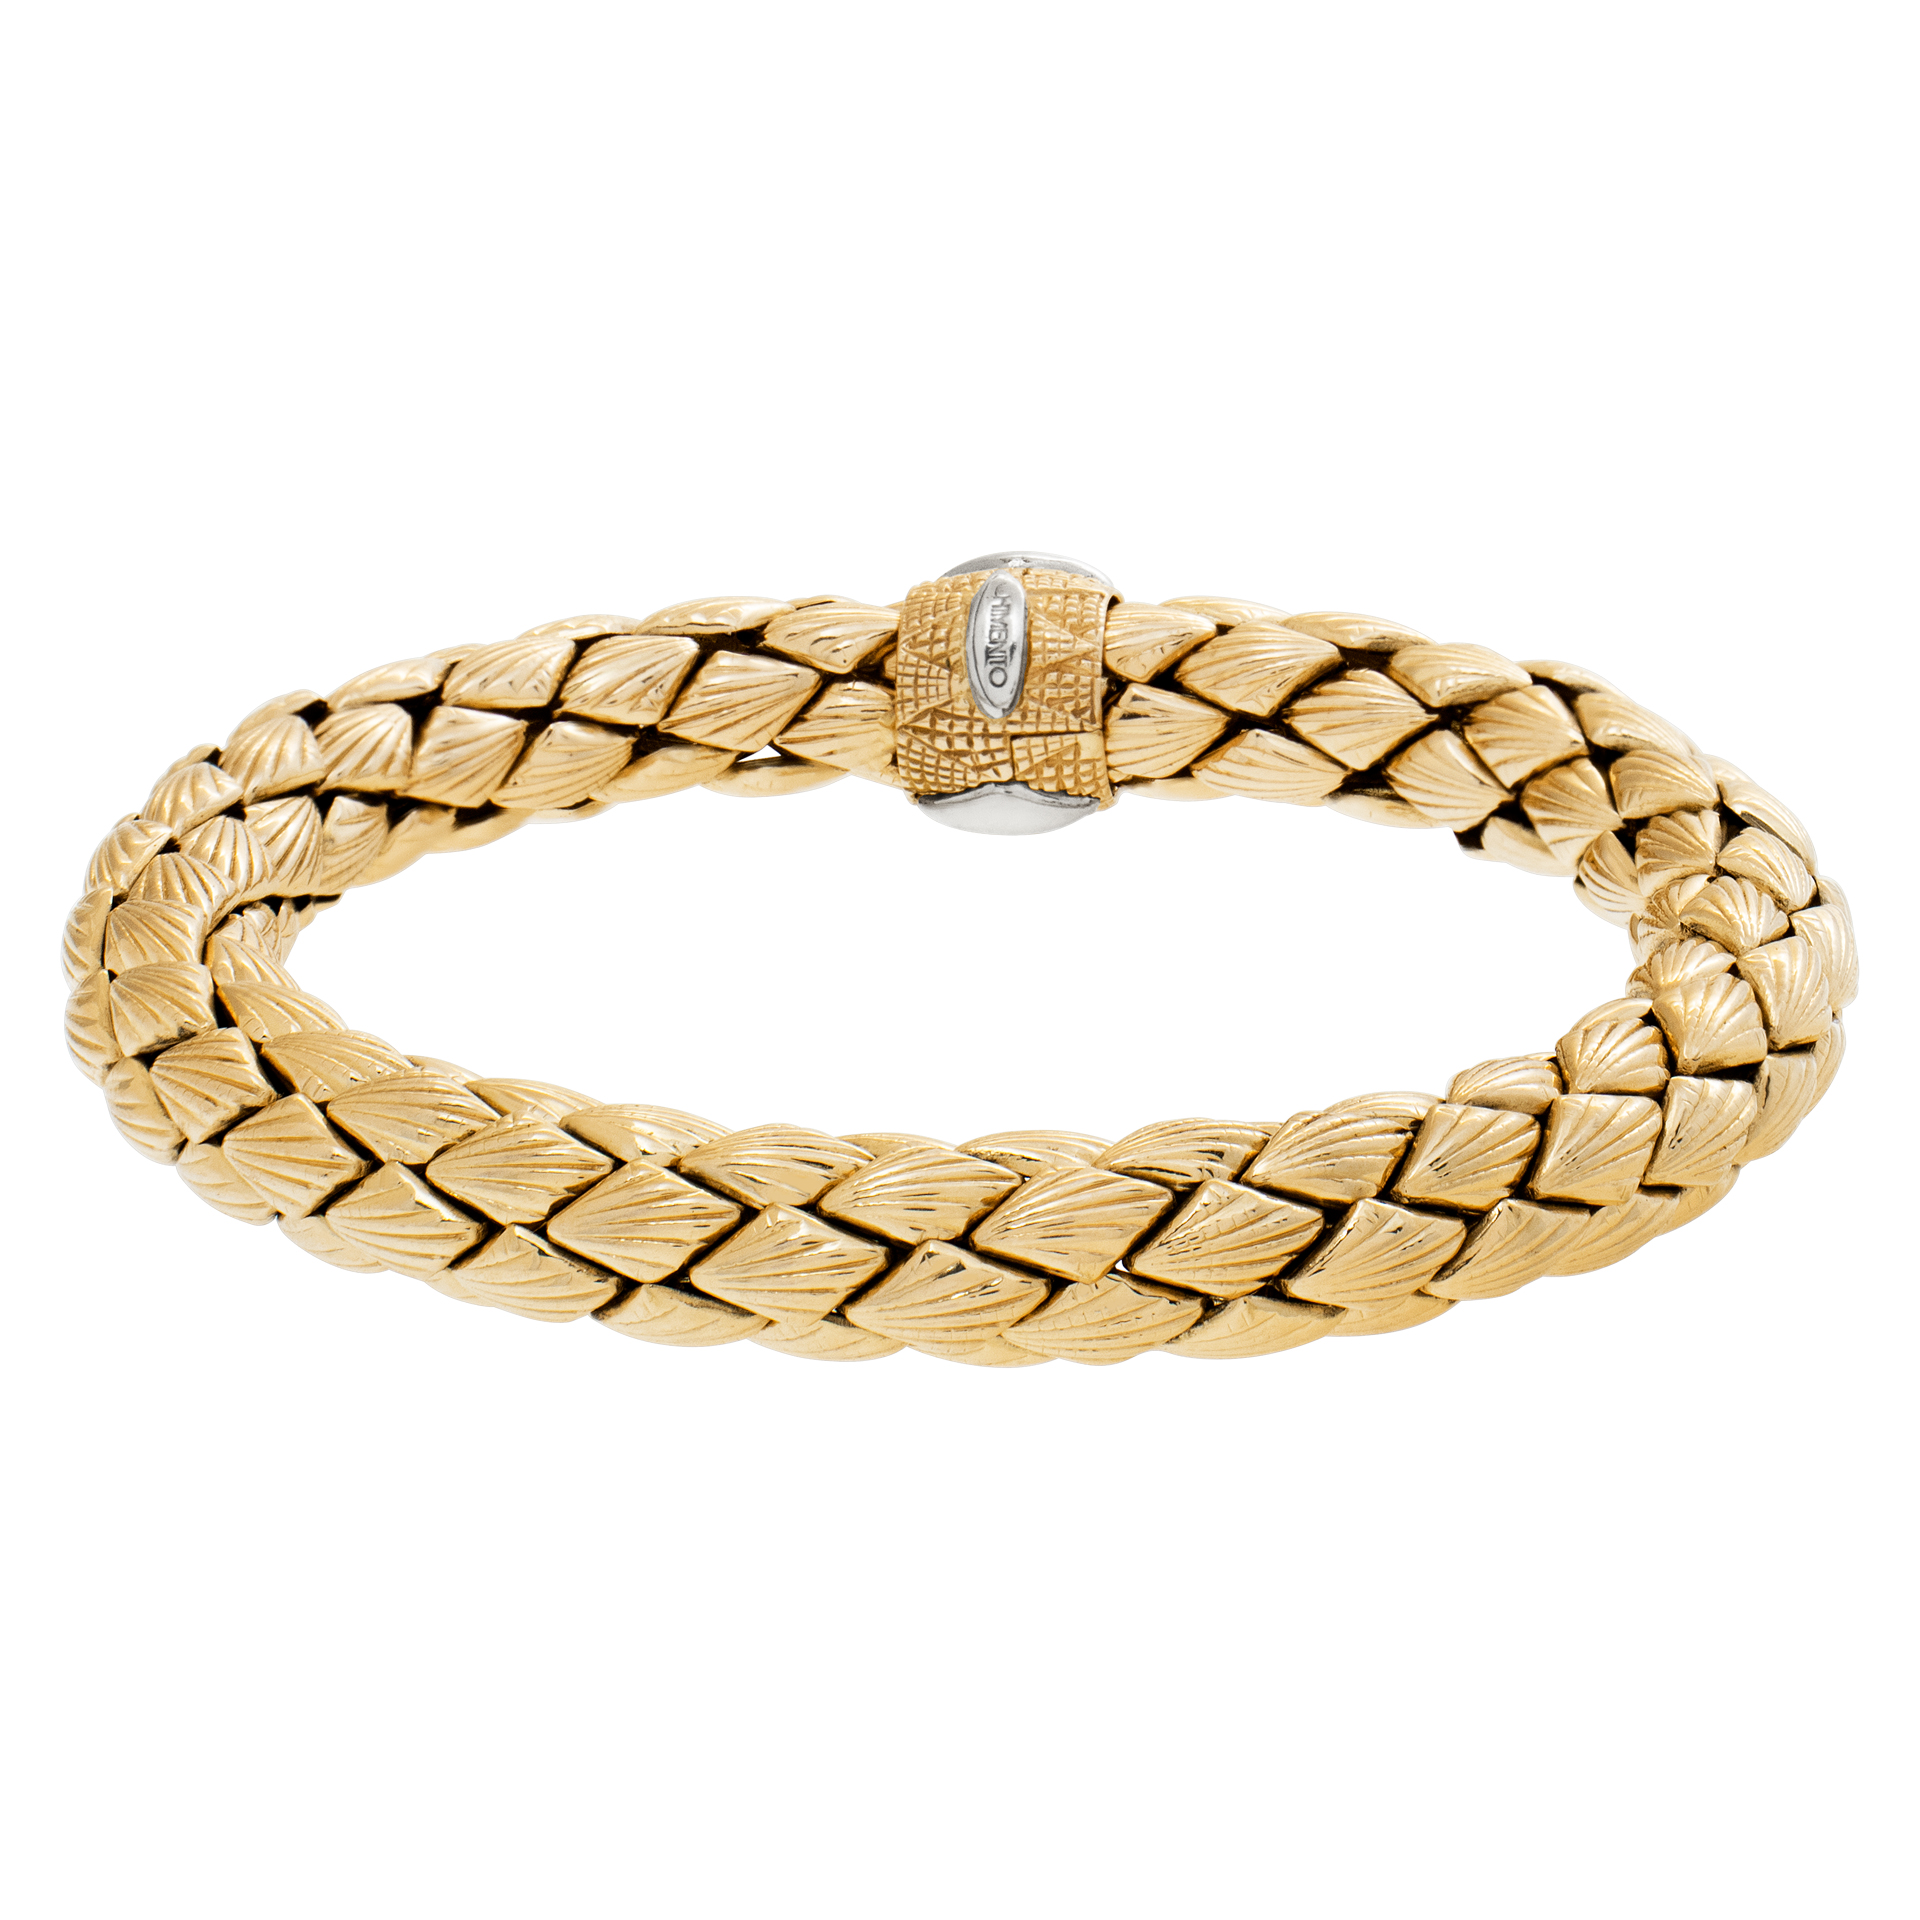 Chimento breaded bracelet in 18k yellow gold with diamond accent on the clasp.